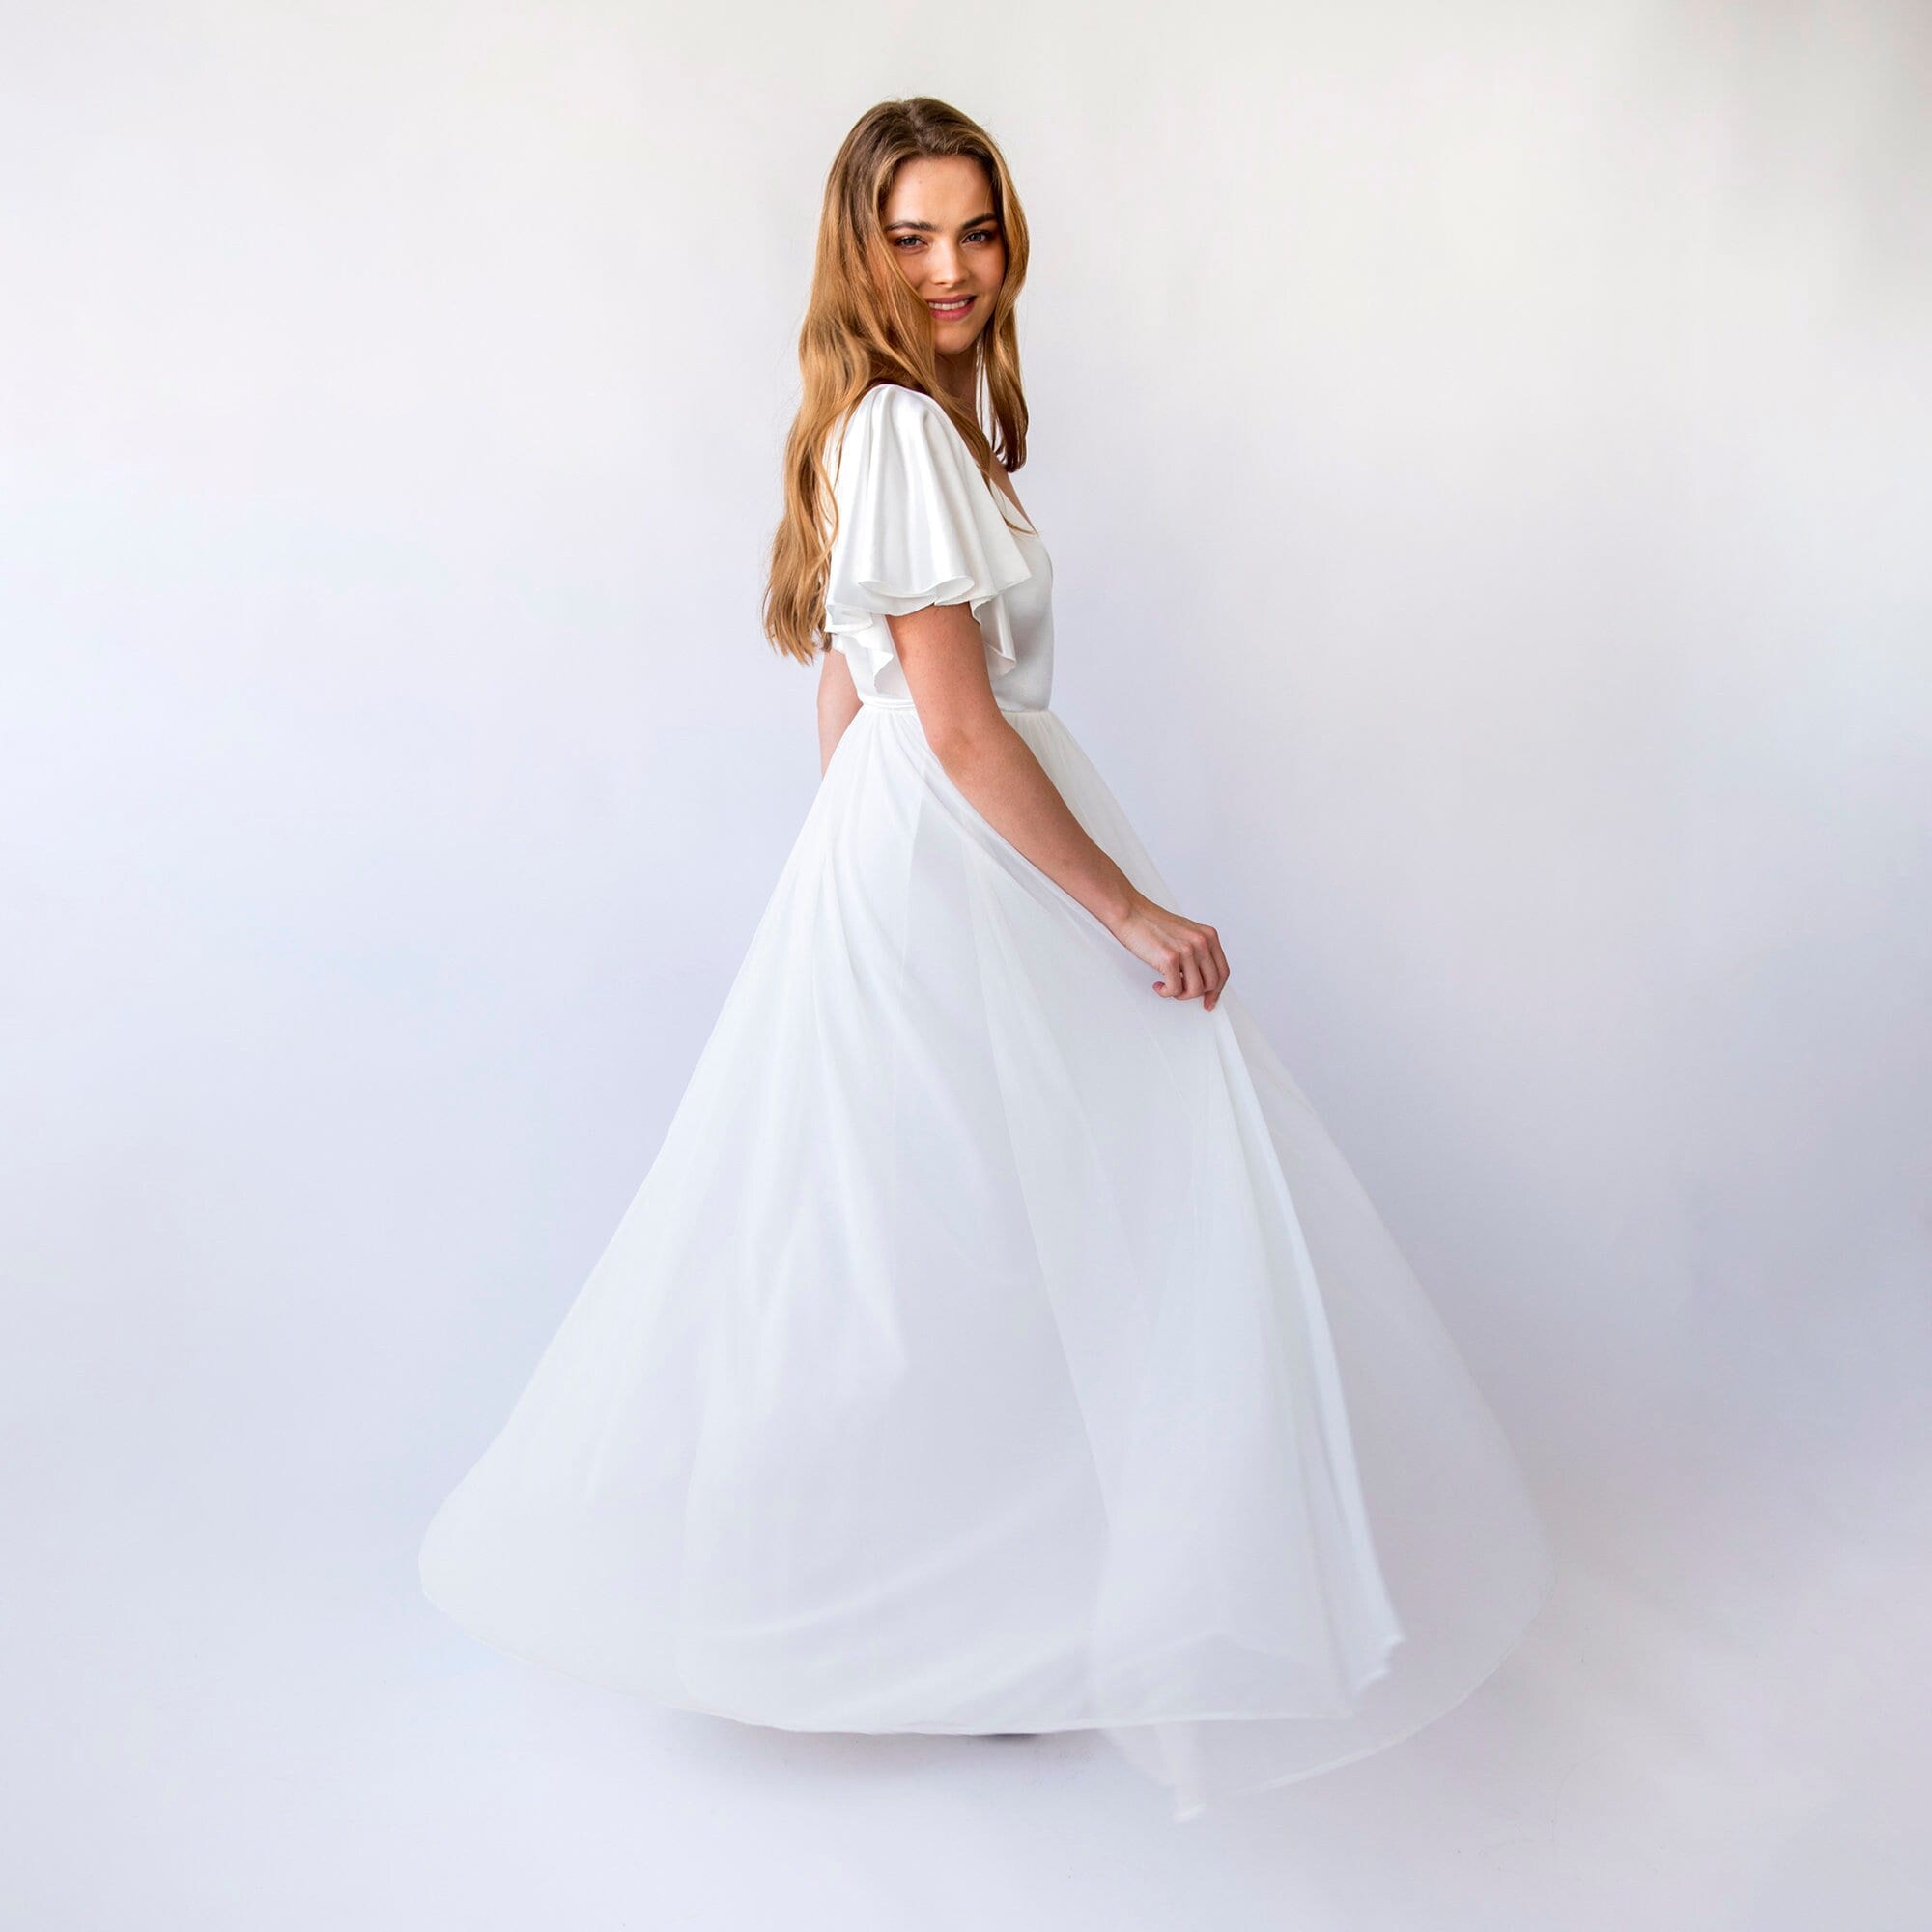 Ultimate Guide to Wedding Dress Styles & Silhouettes for Your Shape